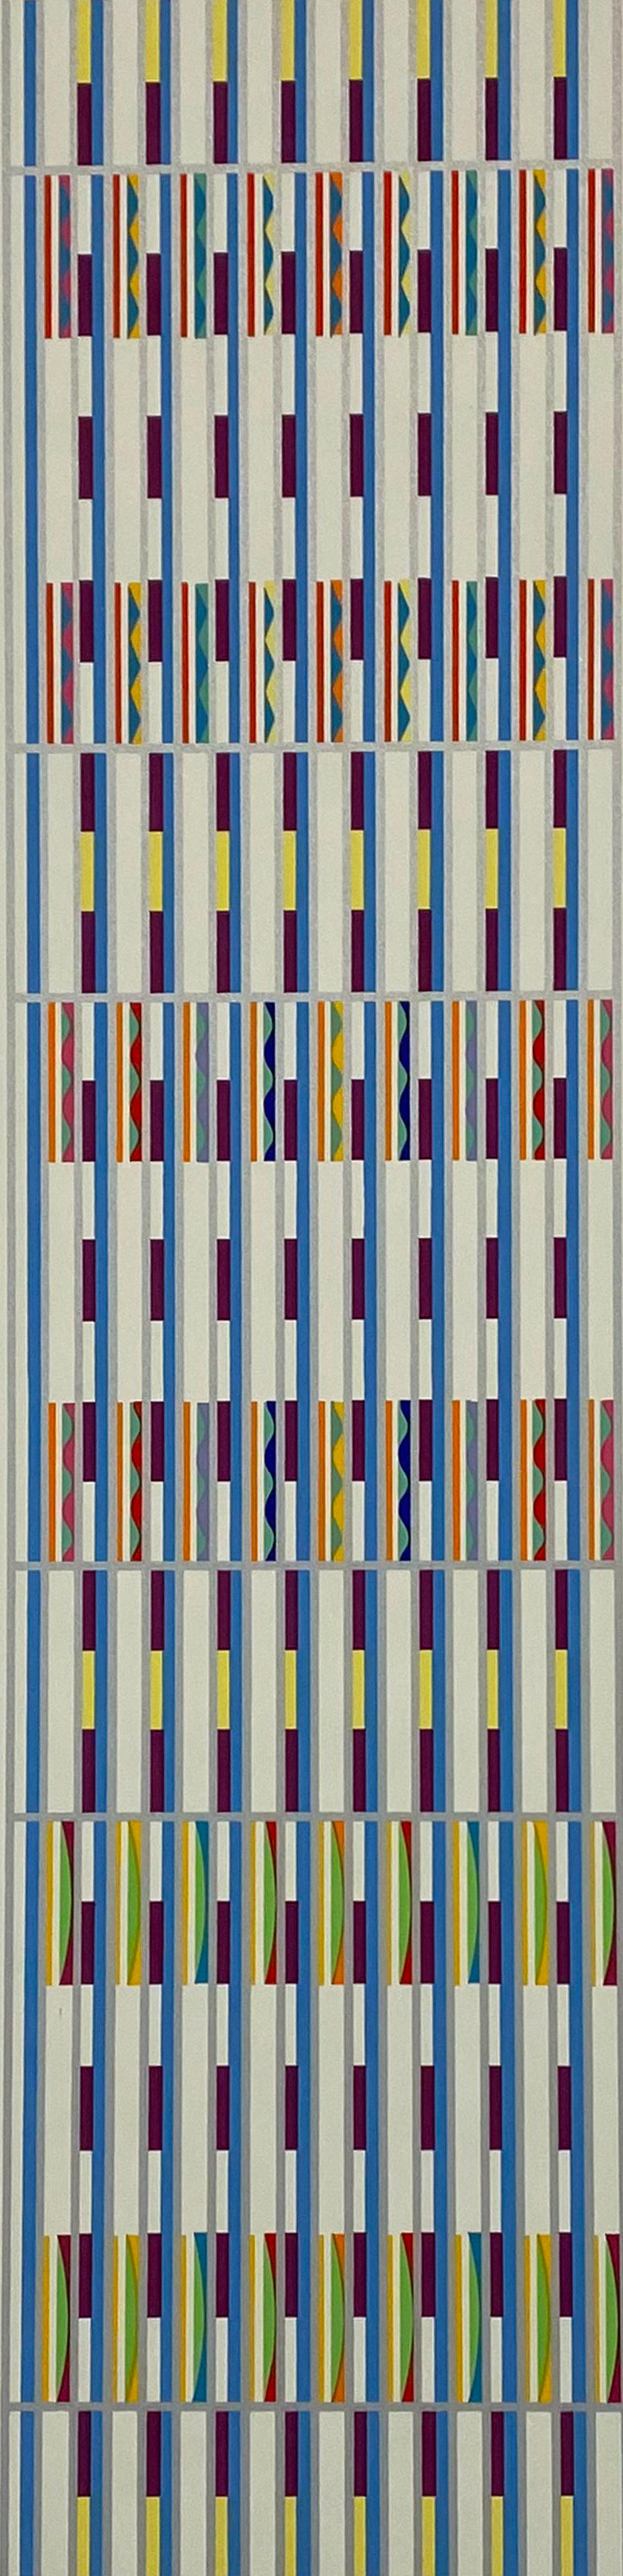 Artist: Yaacov Agam
Title: Untitled
Portfolio: Vertical Orchestration
Medium: Silkscreen
Year: 1980s
Edition: 23/54
Sheet Size: 29 5/8" x 8 3/4"
Image Size: 24" x 6"
Signed: Hand signed and numbered